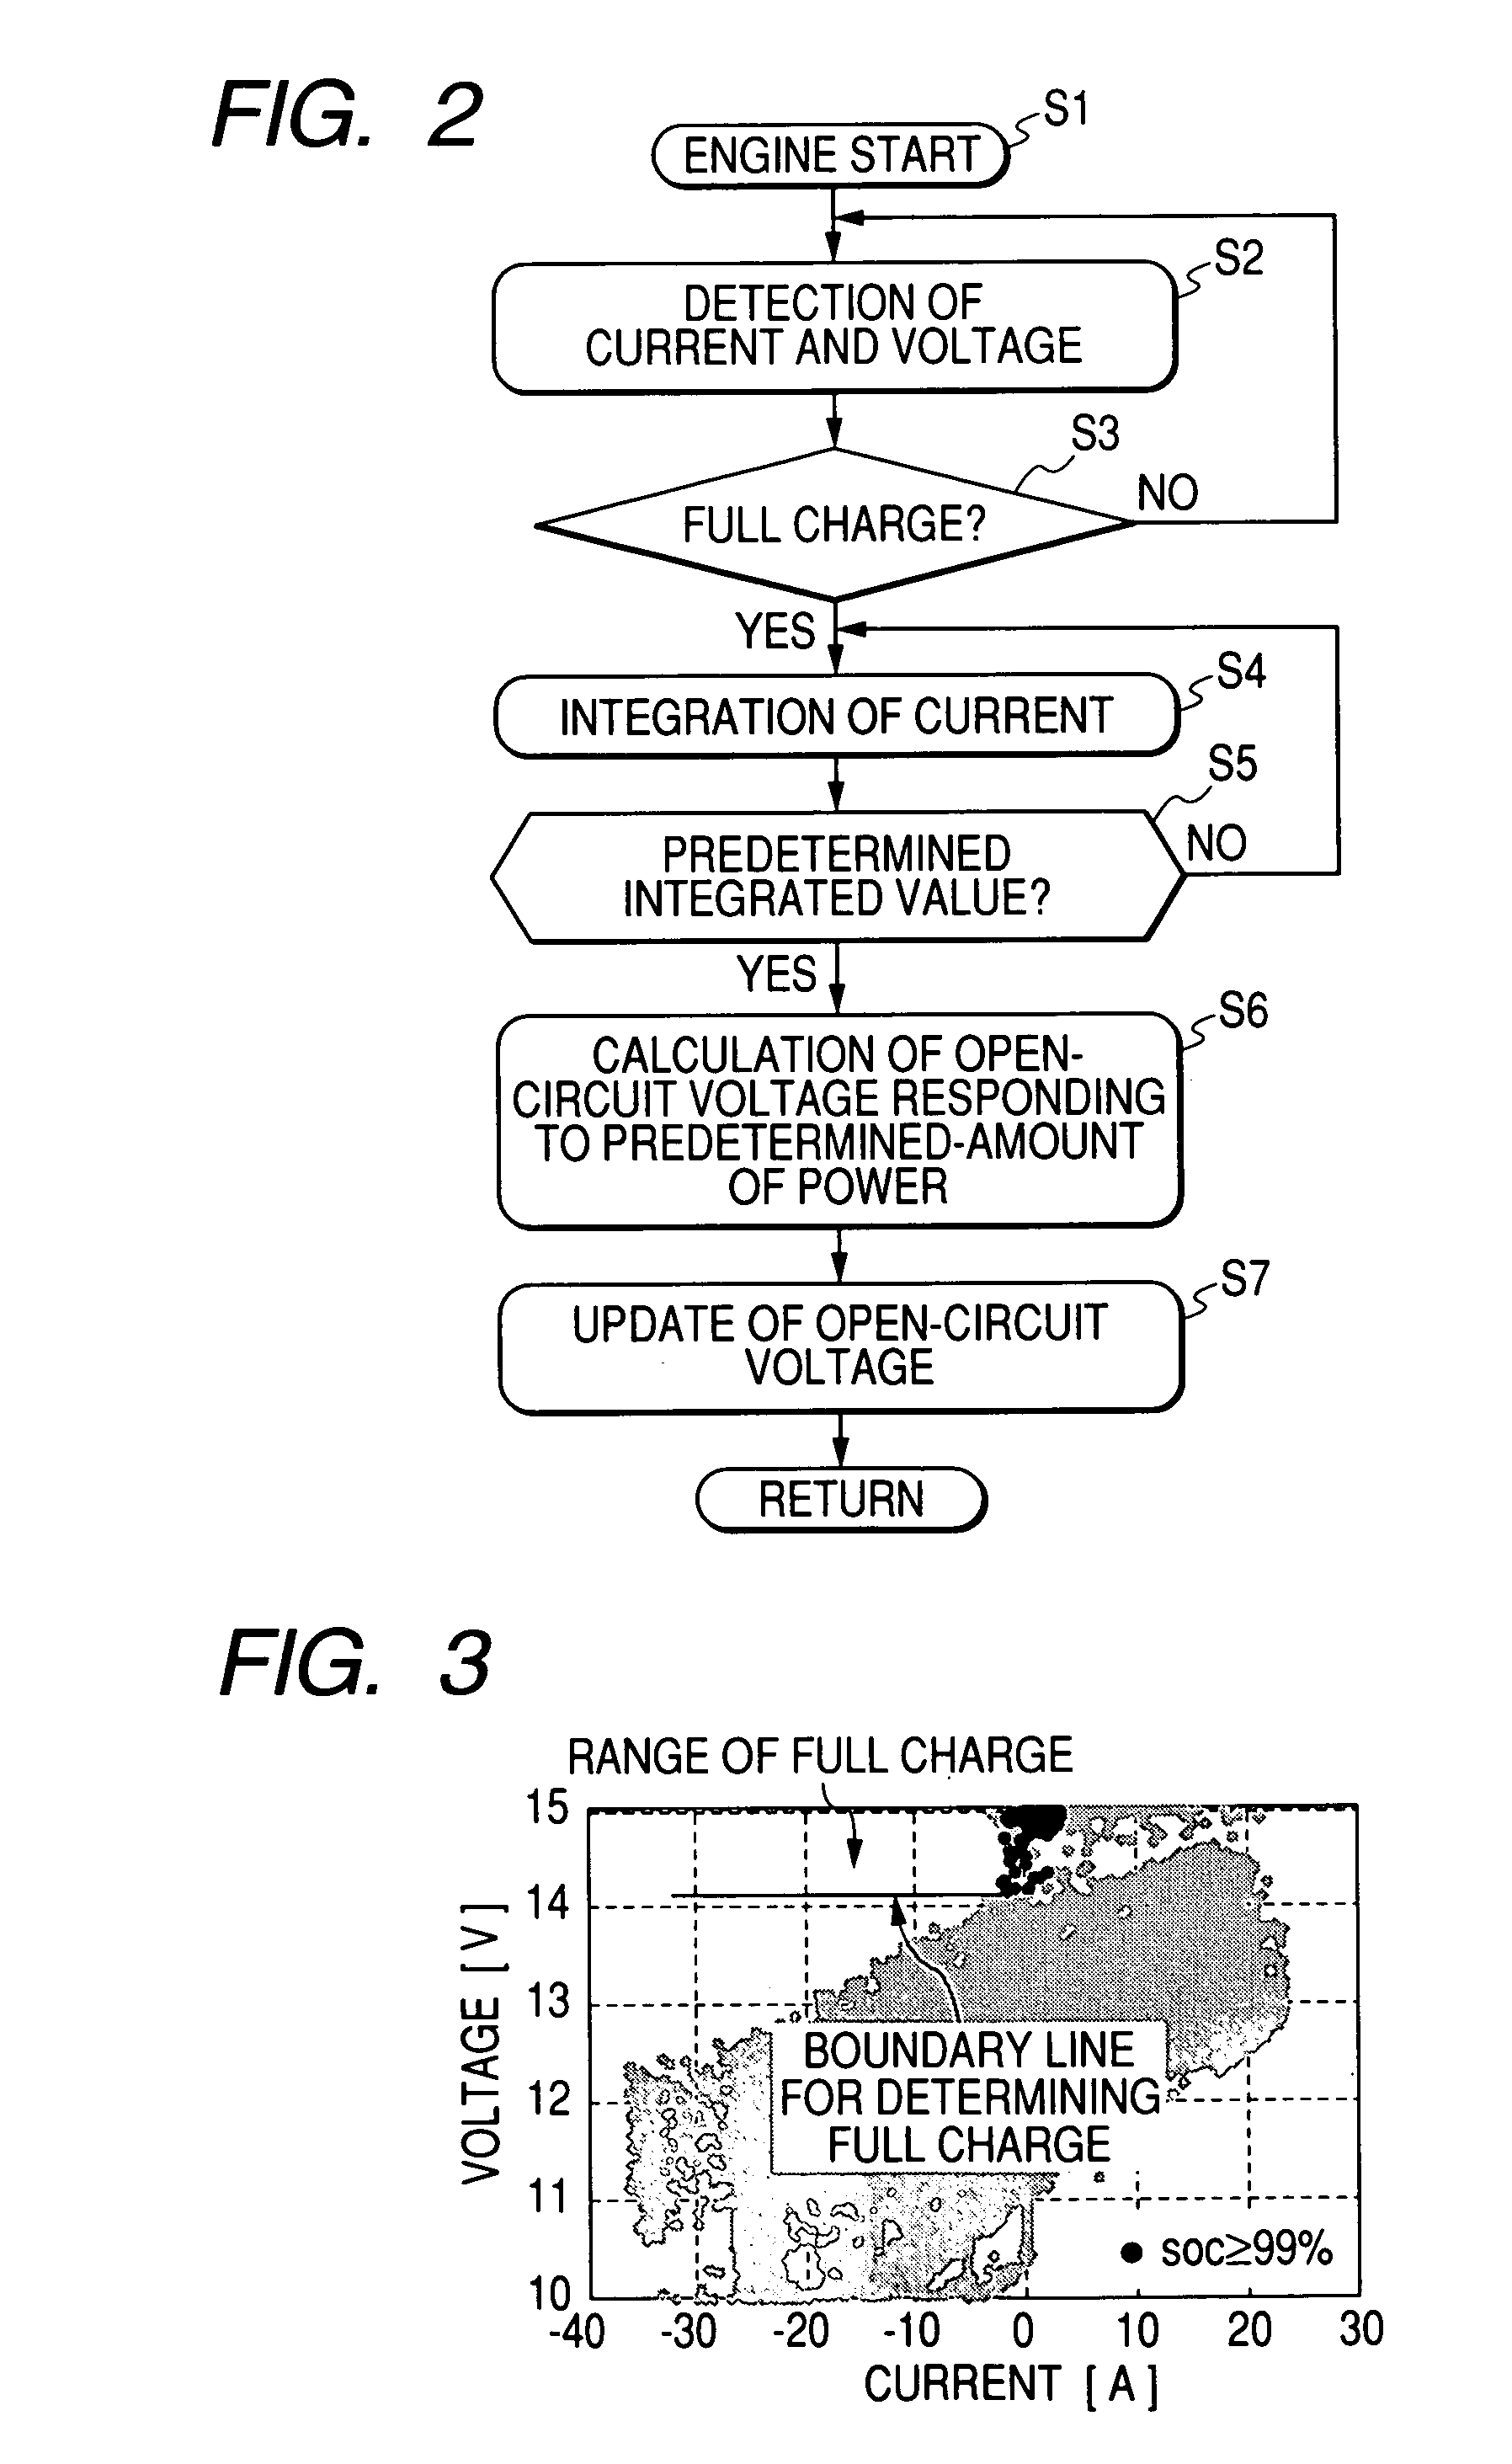 Method and apparatus for detecting charged state of secondary battery based on neural network calculation